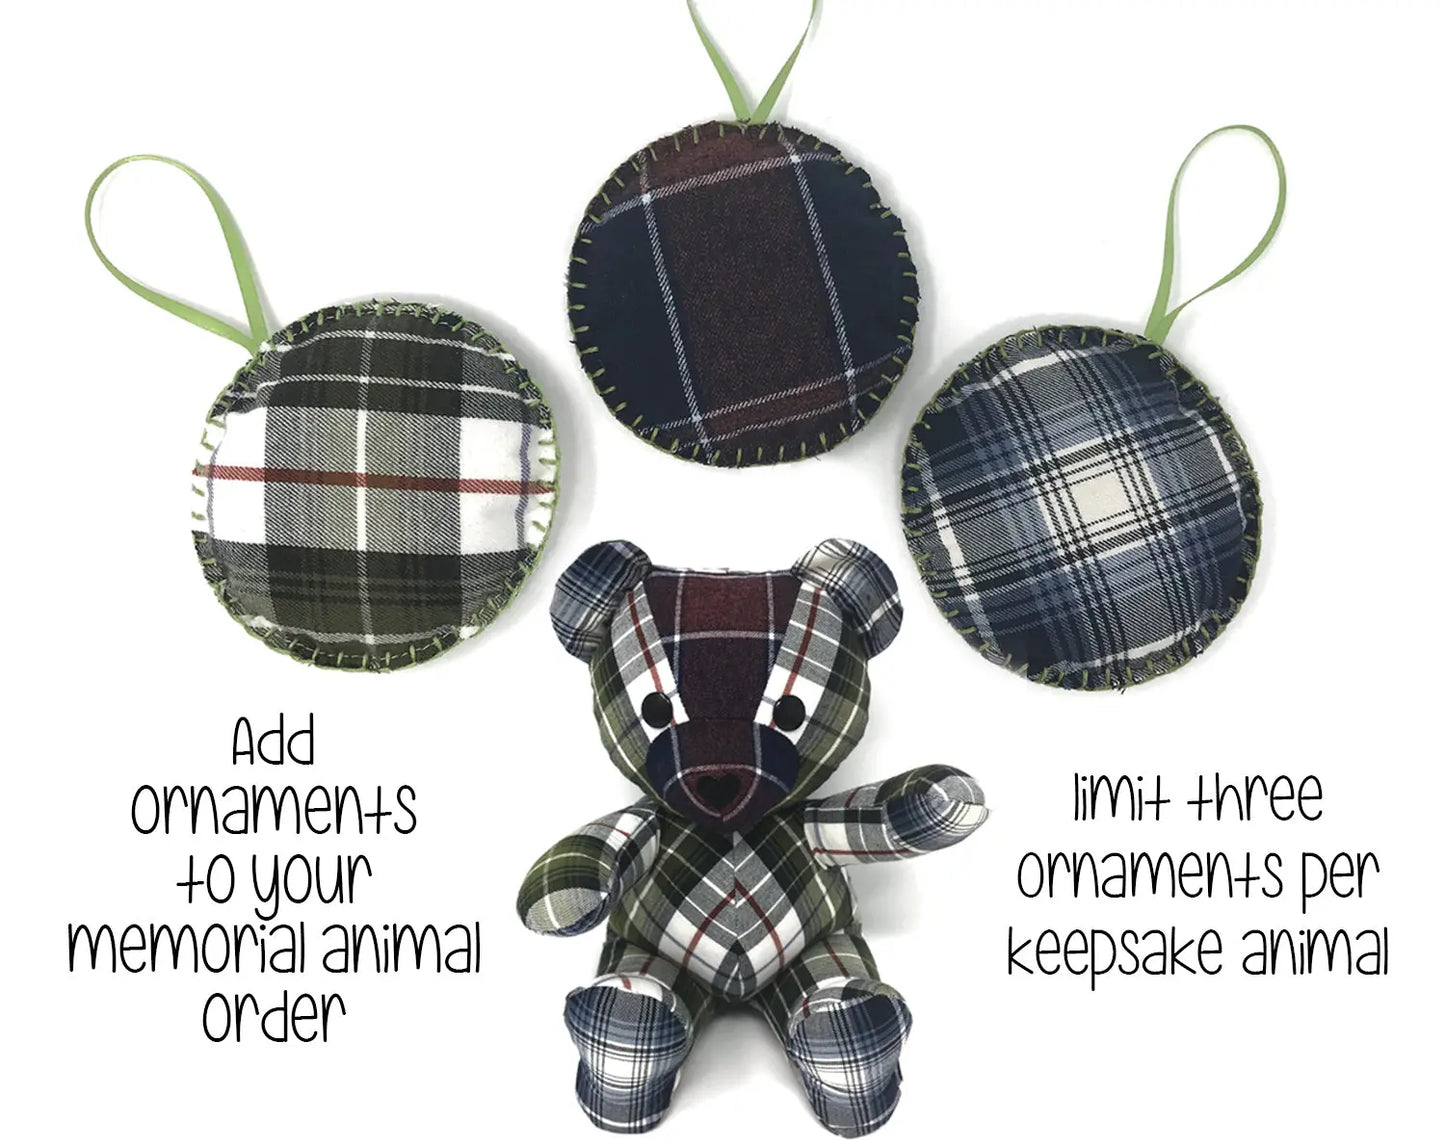 memory ornaments made from clothing